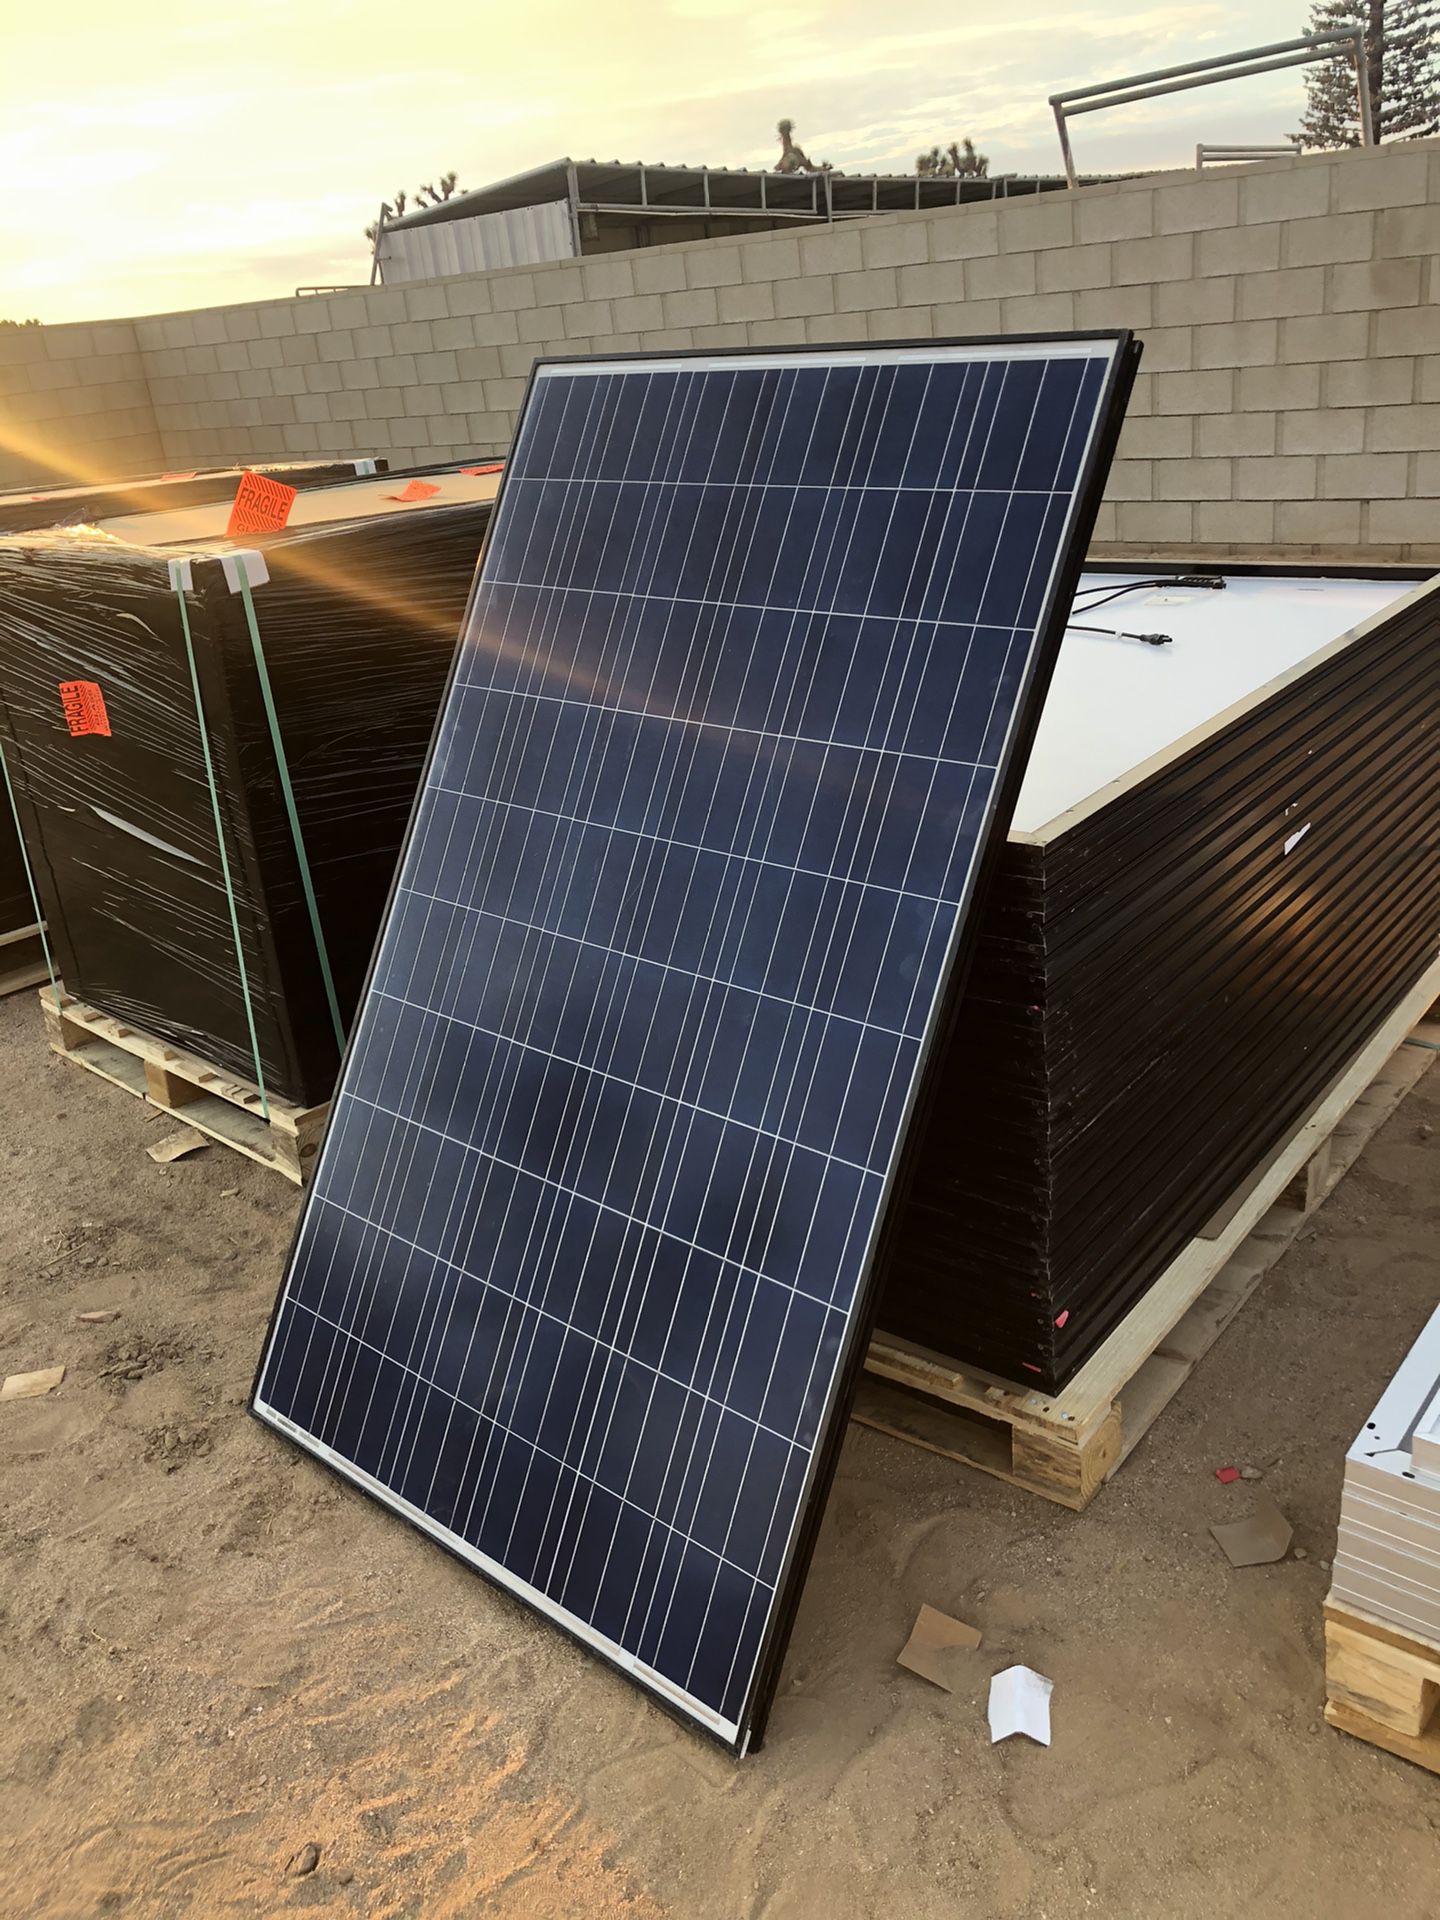 I have some 250 watt 30 volt, 8.4 amps, used Canadian brand solar panels, work great, measure 64 1/2 x 38 3/4 - 40 pounds each, $100 each. PANELS ARE